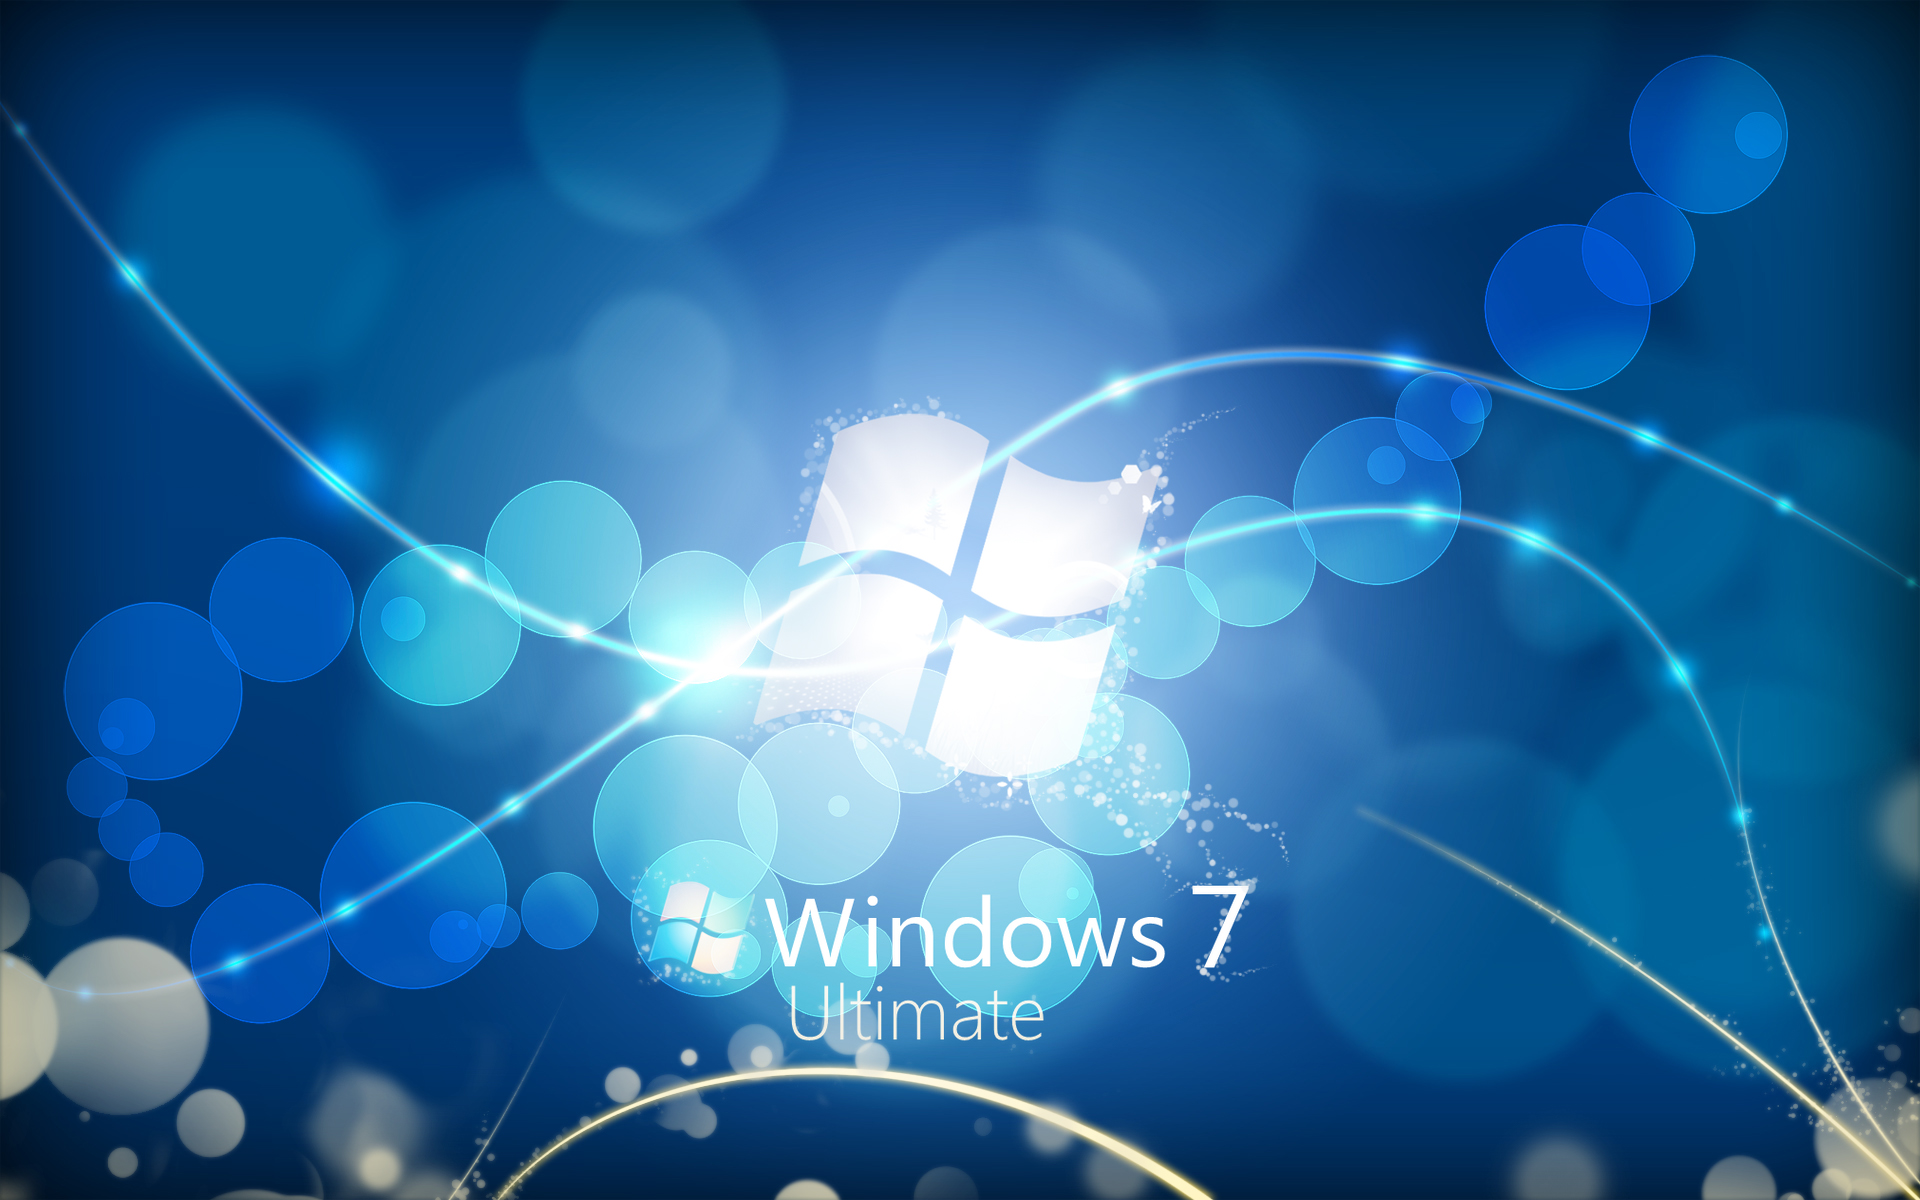 Blue Wallpapers For Windows 7 - ImgMob